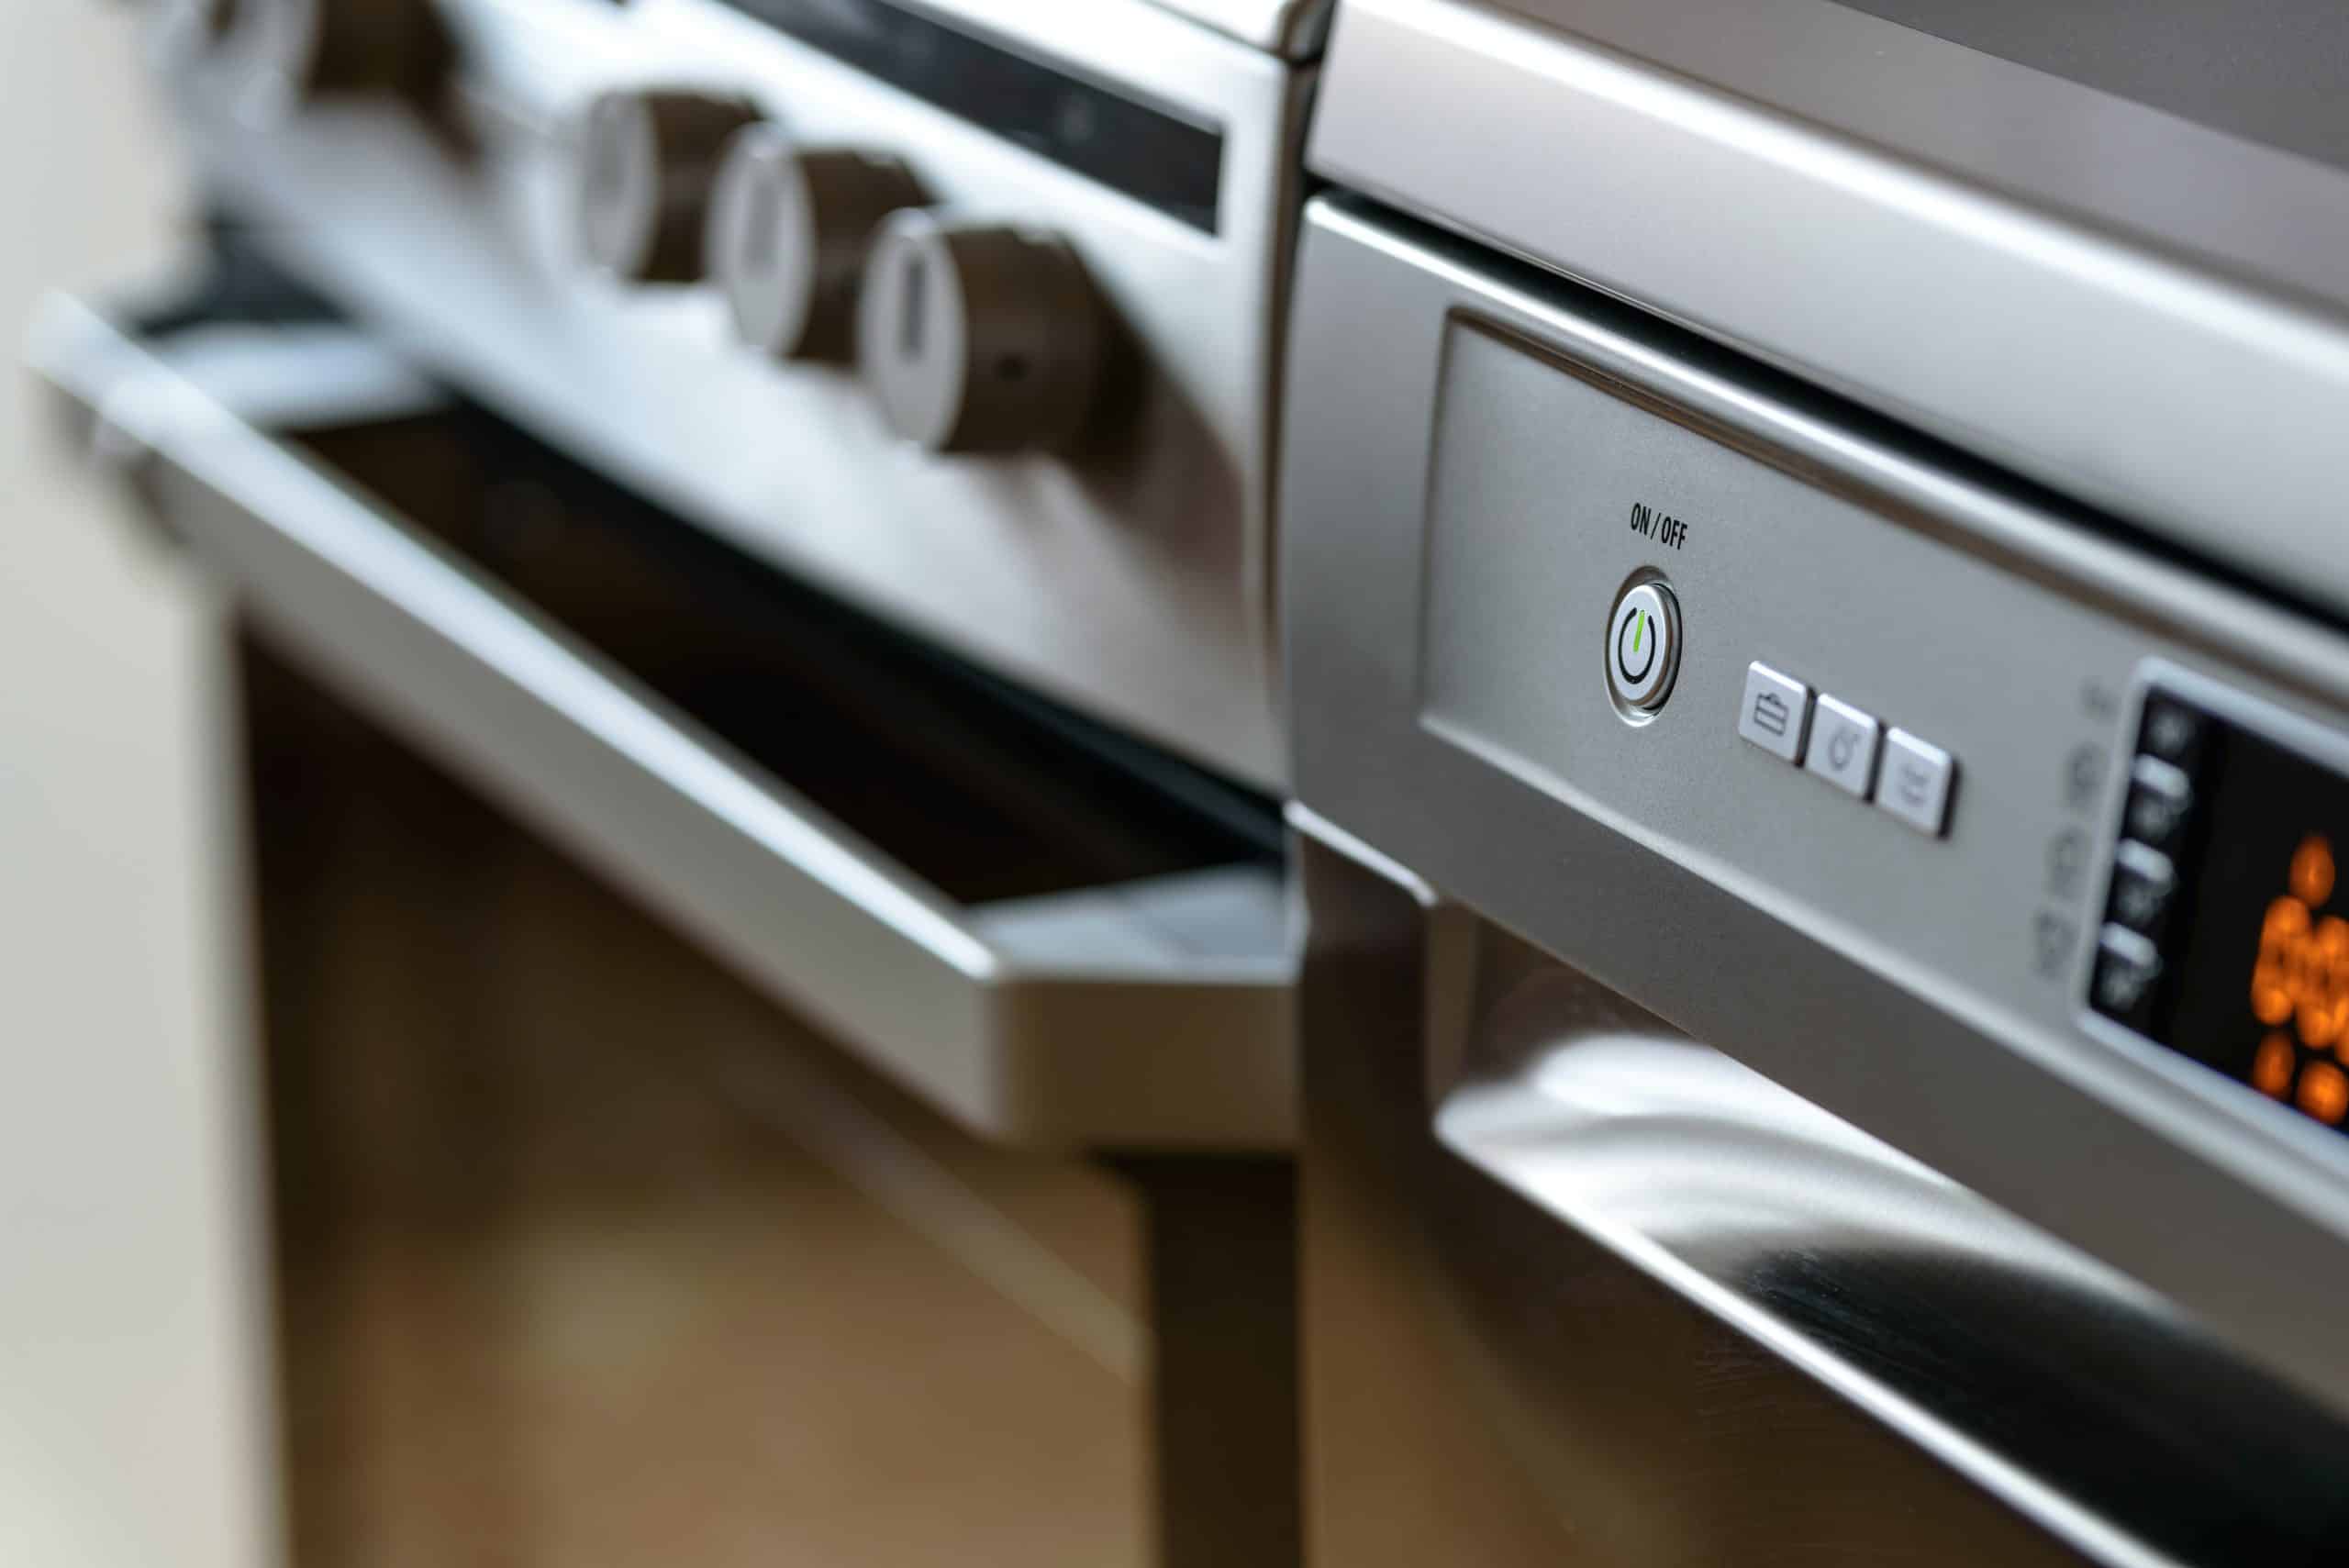 S&S Appliance: The Best Appliance Service Contractor In Alabama